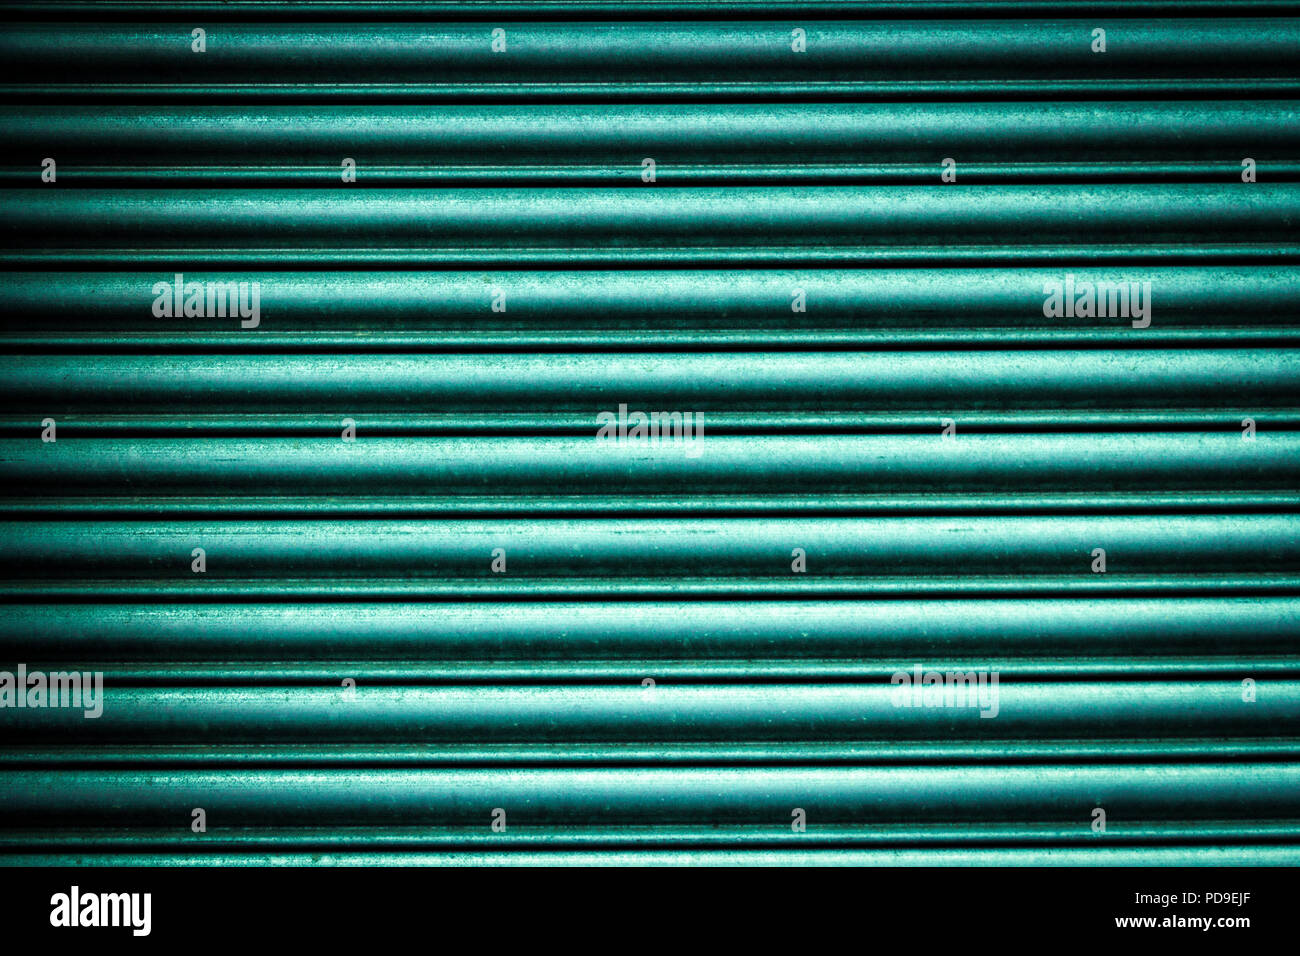 Close-up of the wavy aluminum metal surface background in green, turquoise, teal color in the sunlight Stock Photo